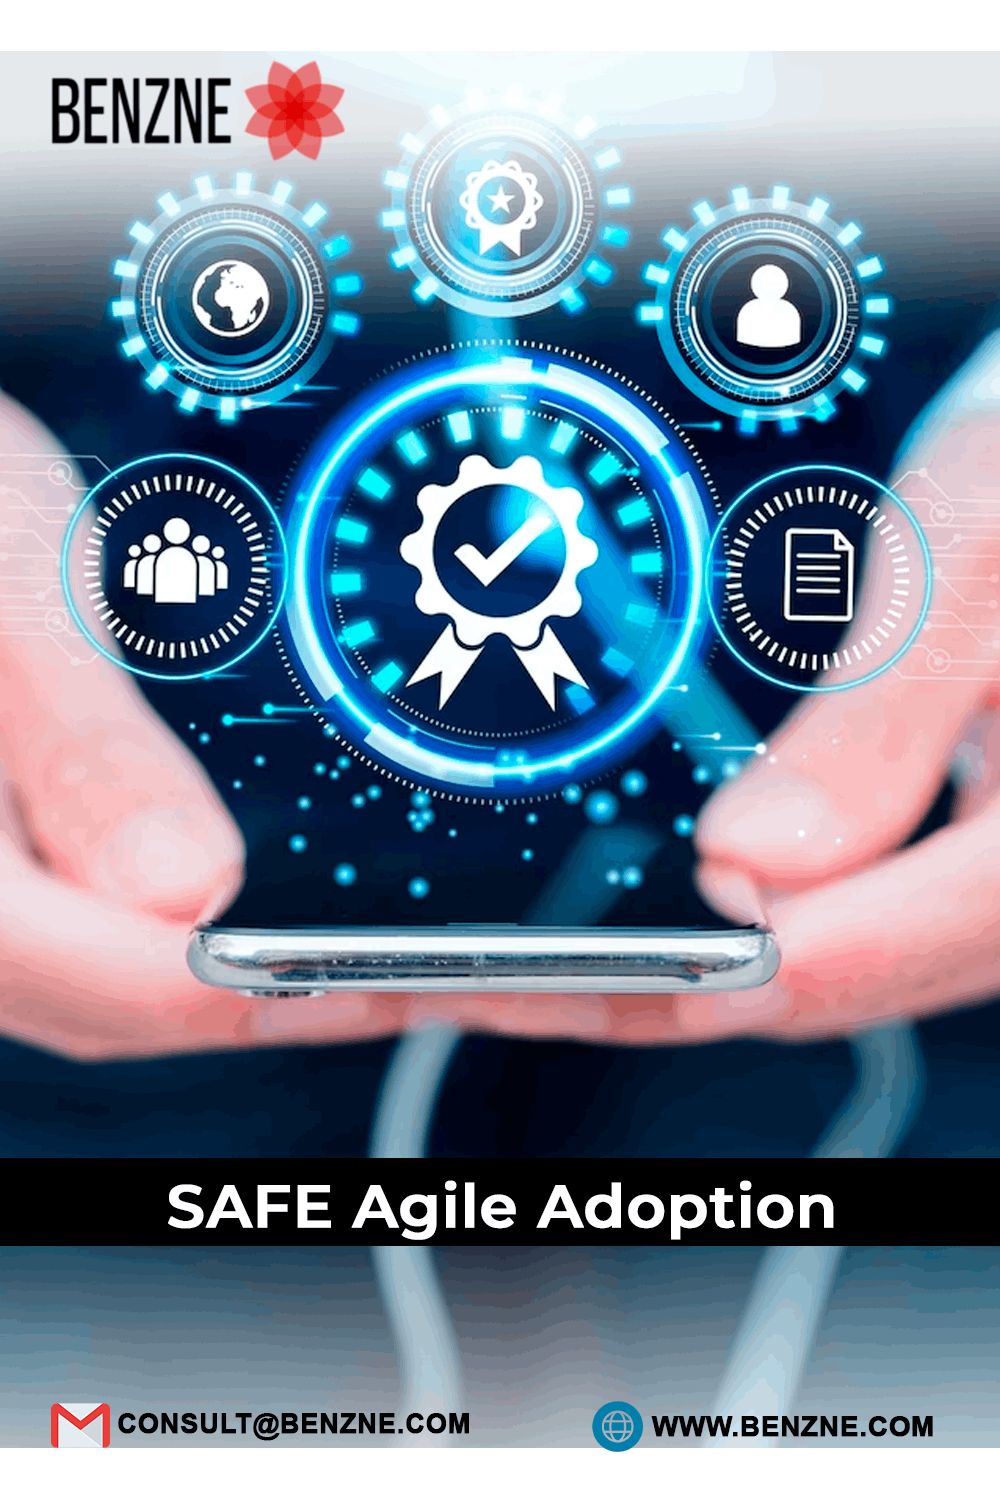 Acquire The Safe Agile Adoption With Benzne For A Better Agile Transformation